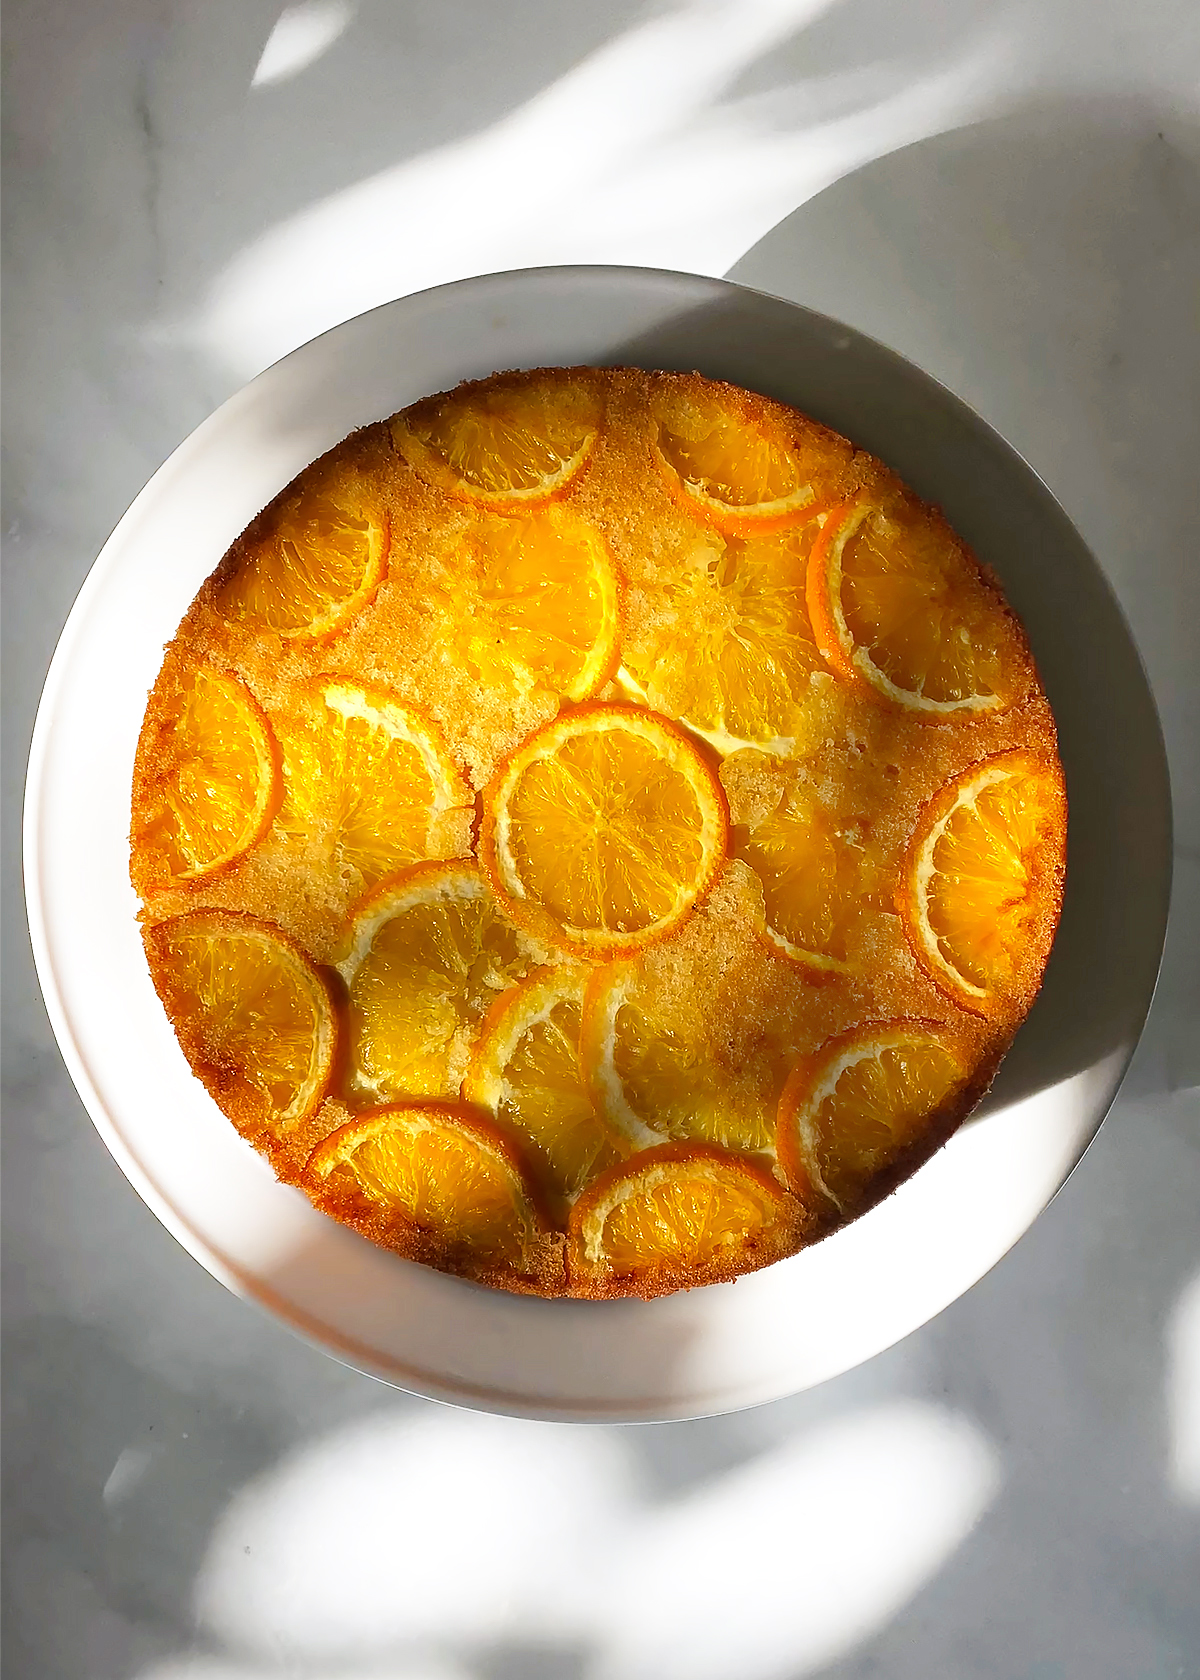 orange olive oil cake on white cake stand on marble countertop background